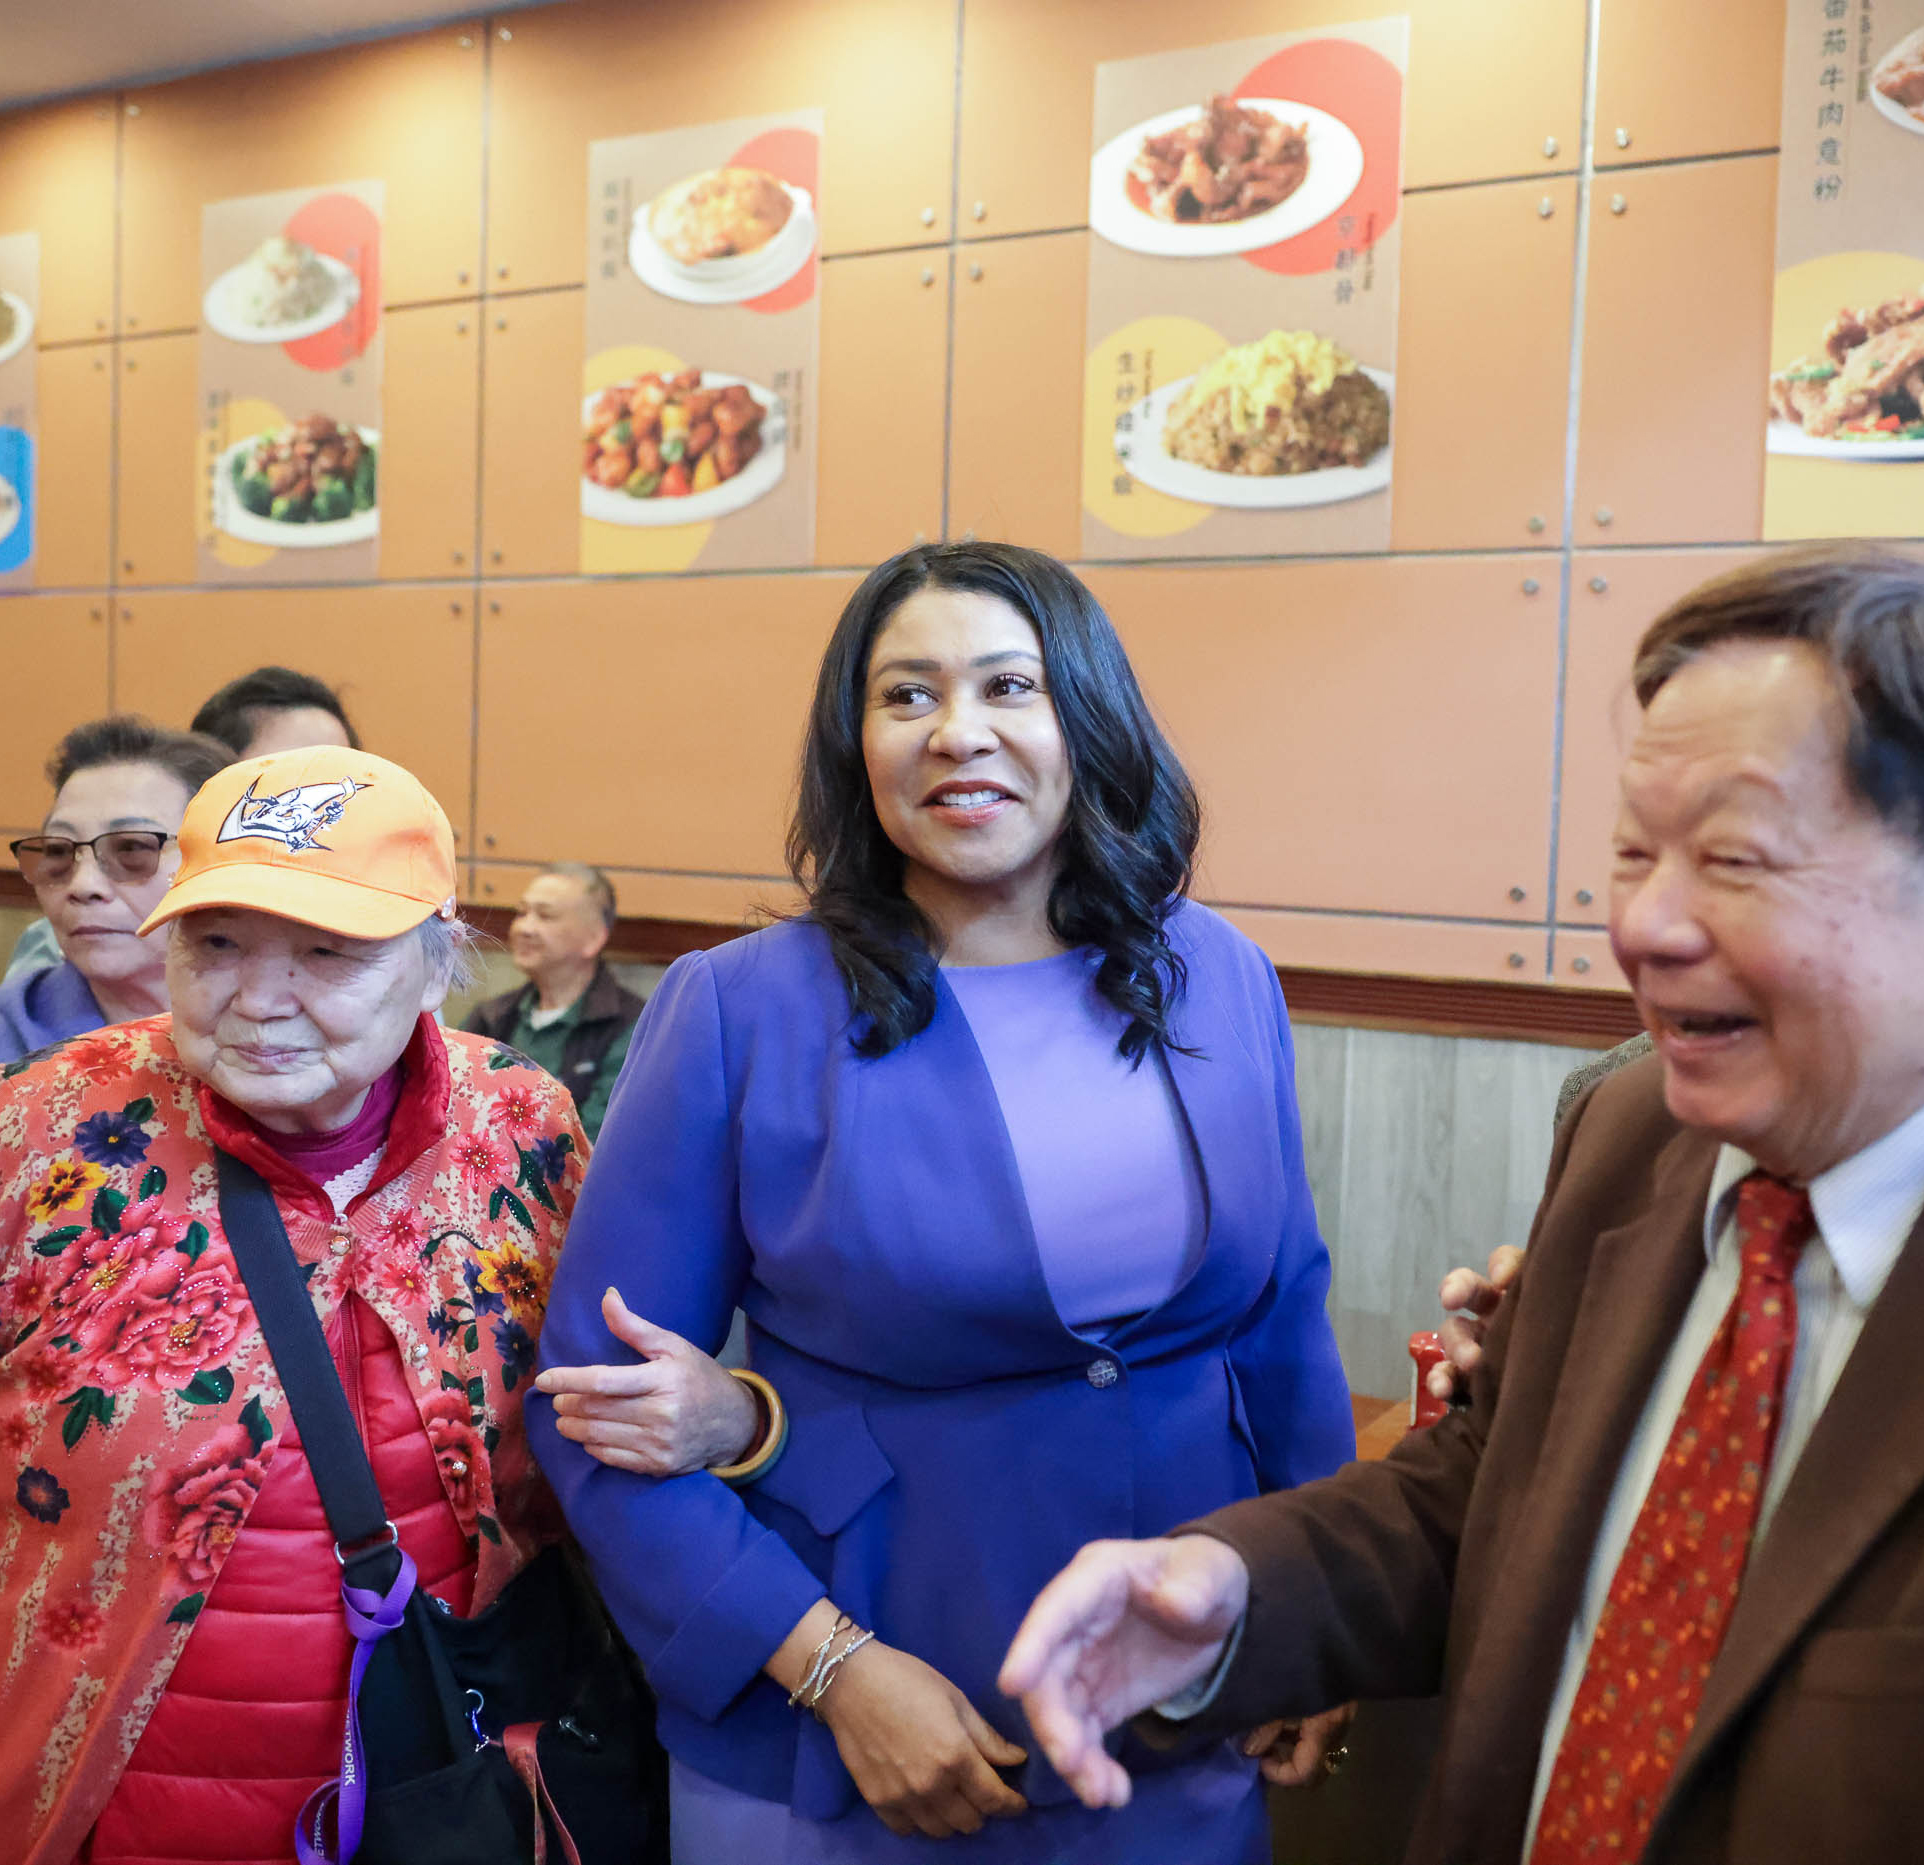 A woman in a blue outfit smiles while shaking hands with a man in a restaurant with meal photos on the wall; an elderly lady in a floral jacket observes.